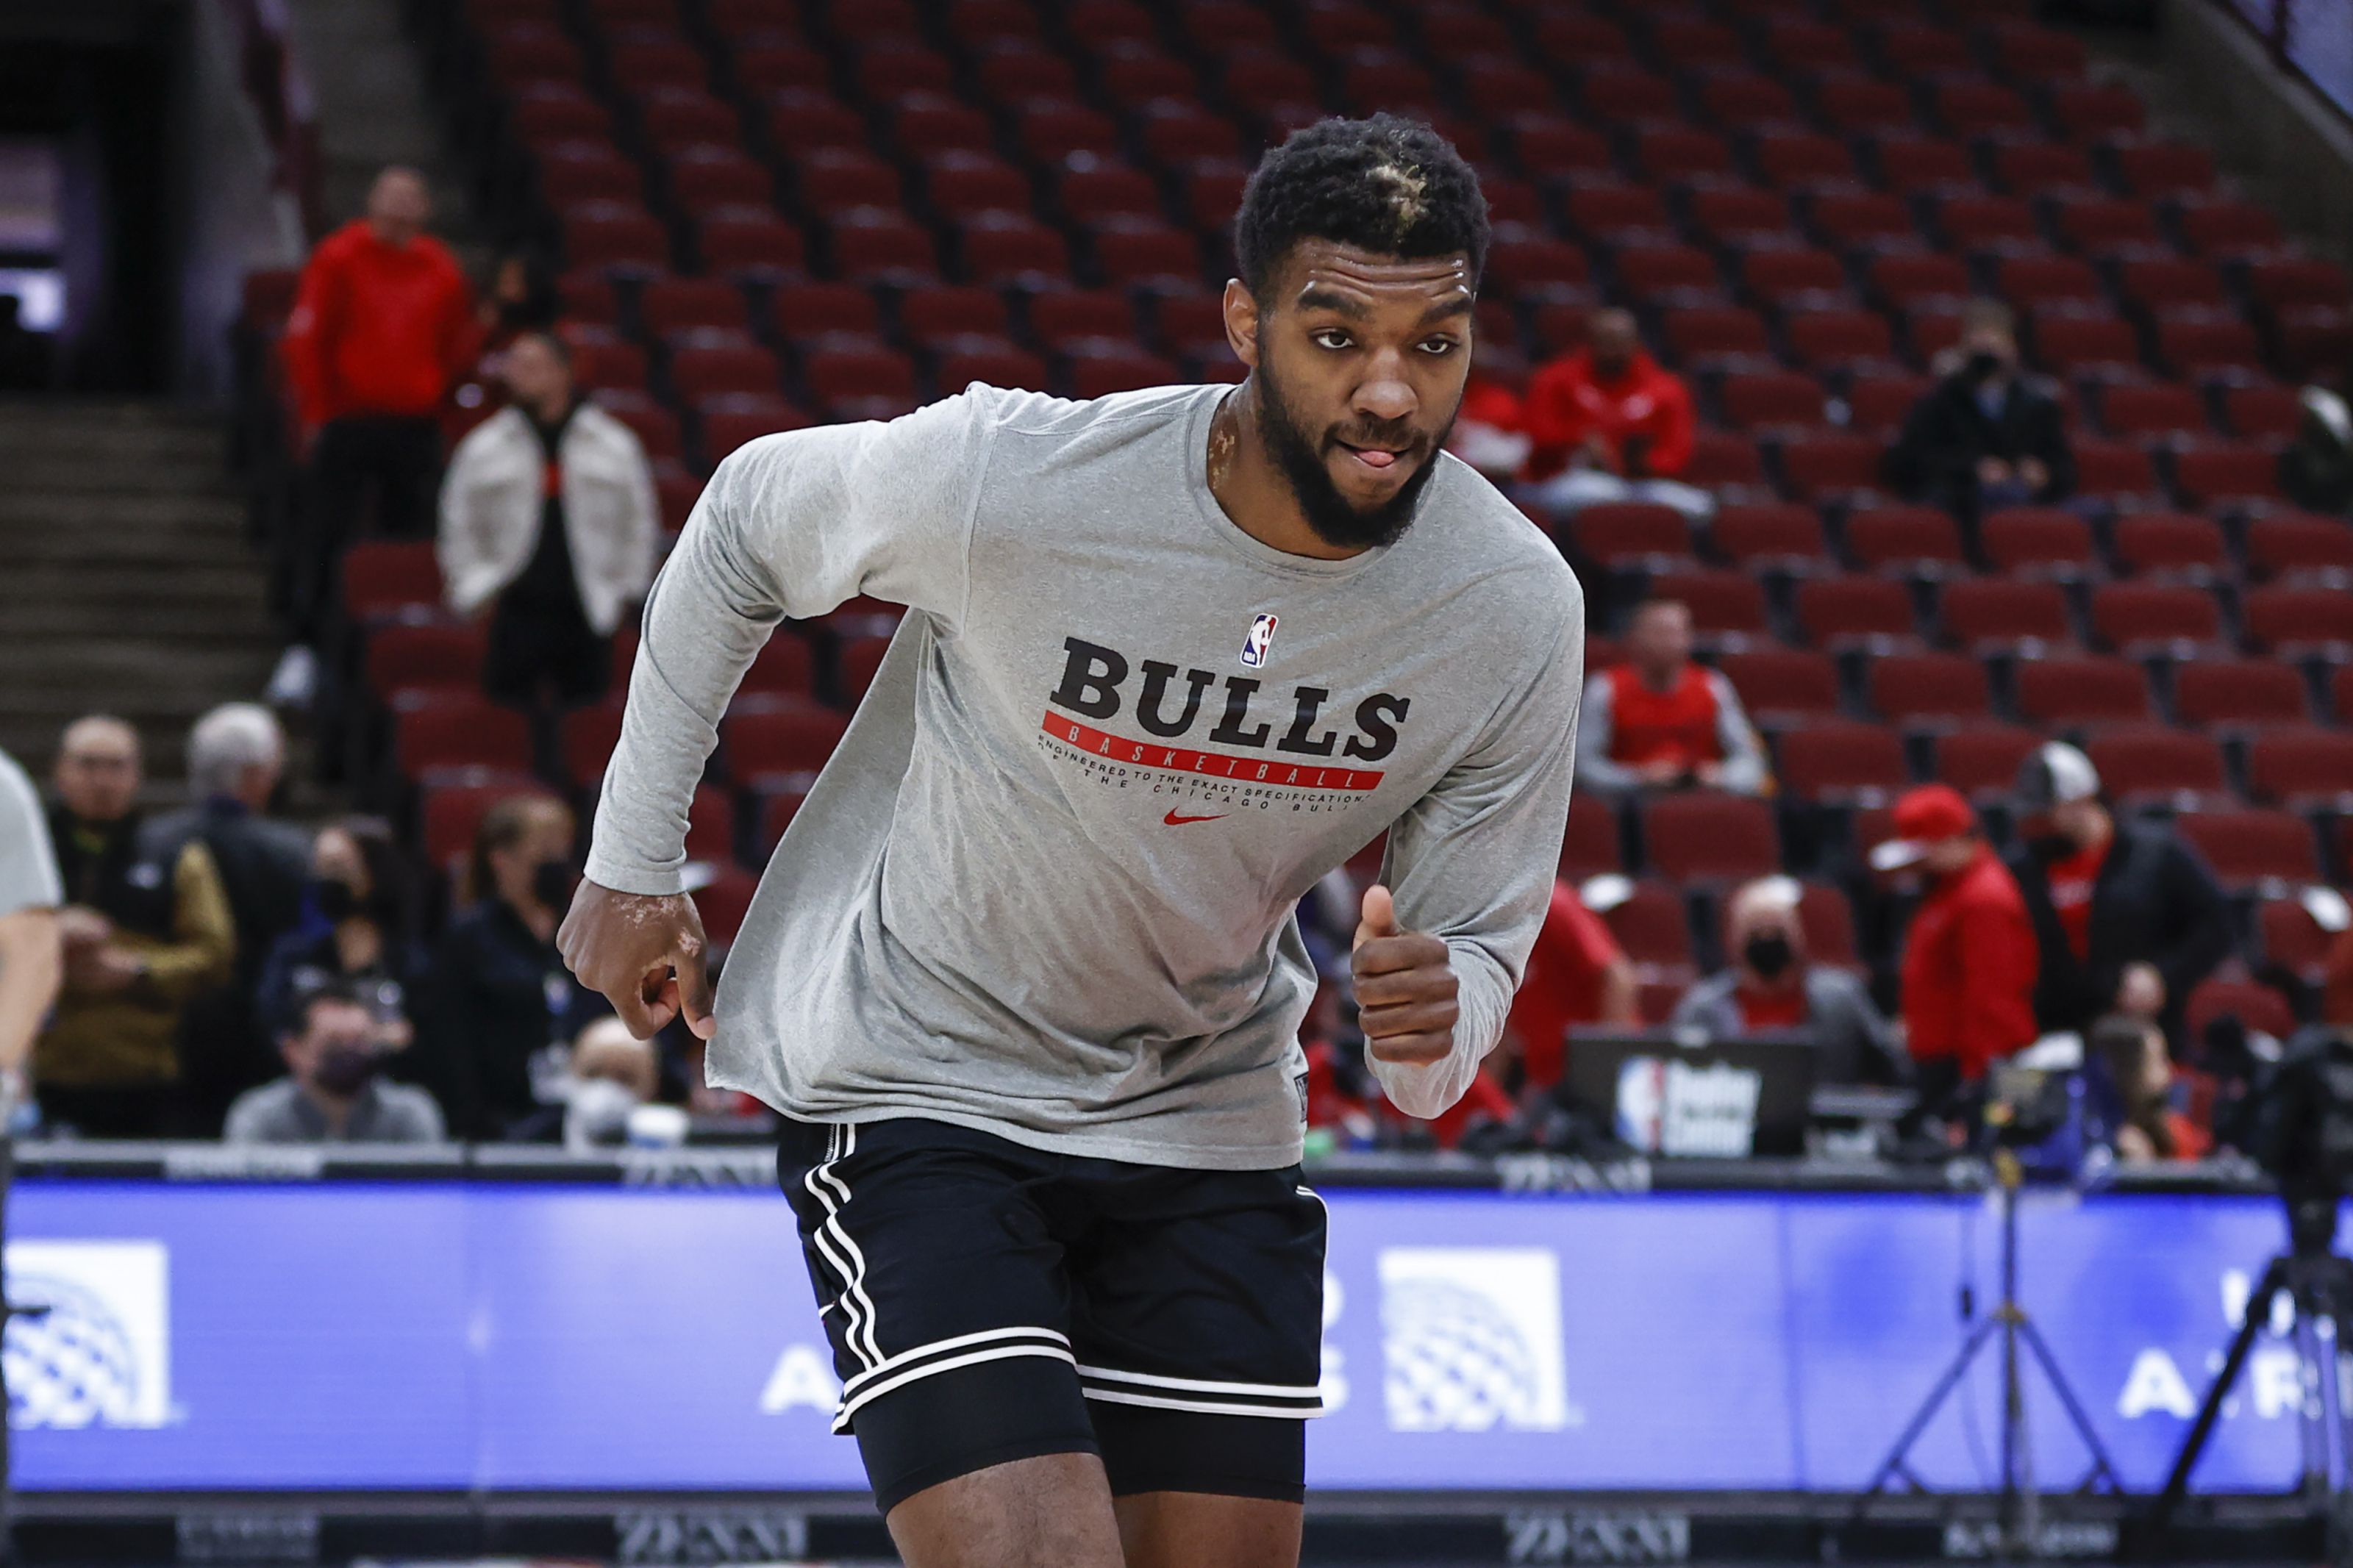 Patrick Williams wows with windmill dunk in Bulls practice facility